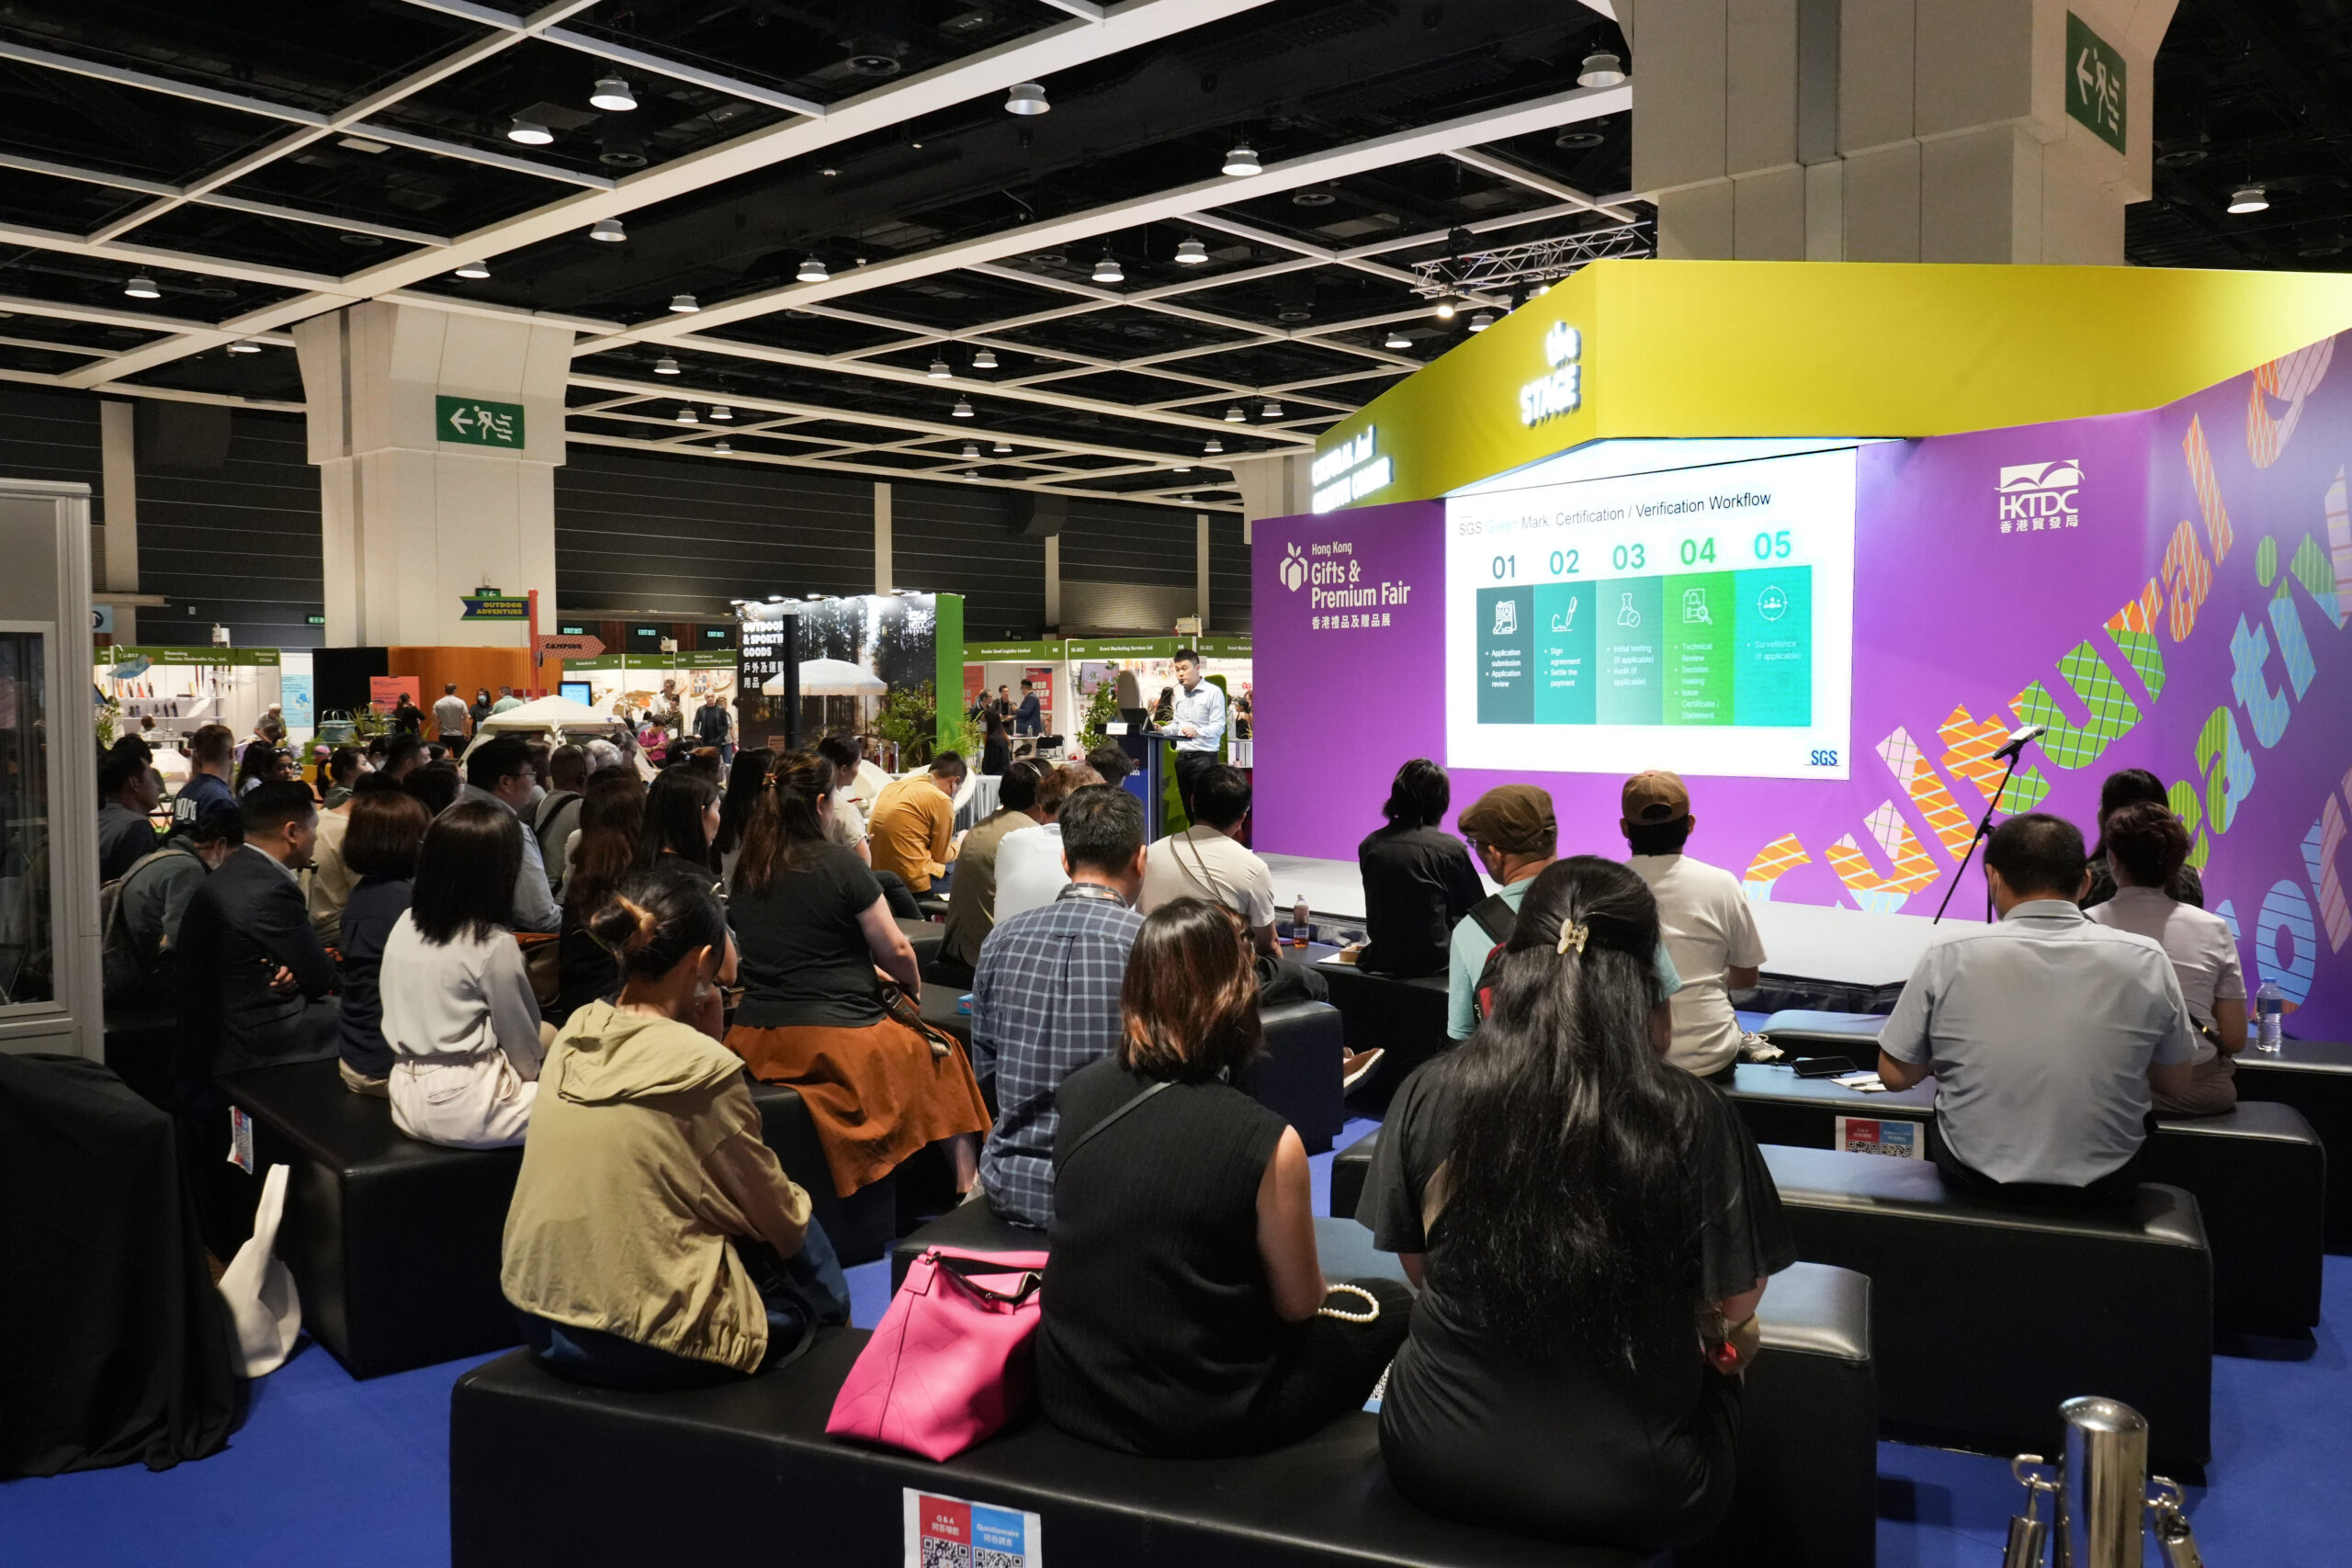 A number of seminars were held to enrich visitors with the latest gift trends.